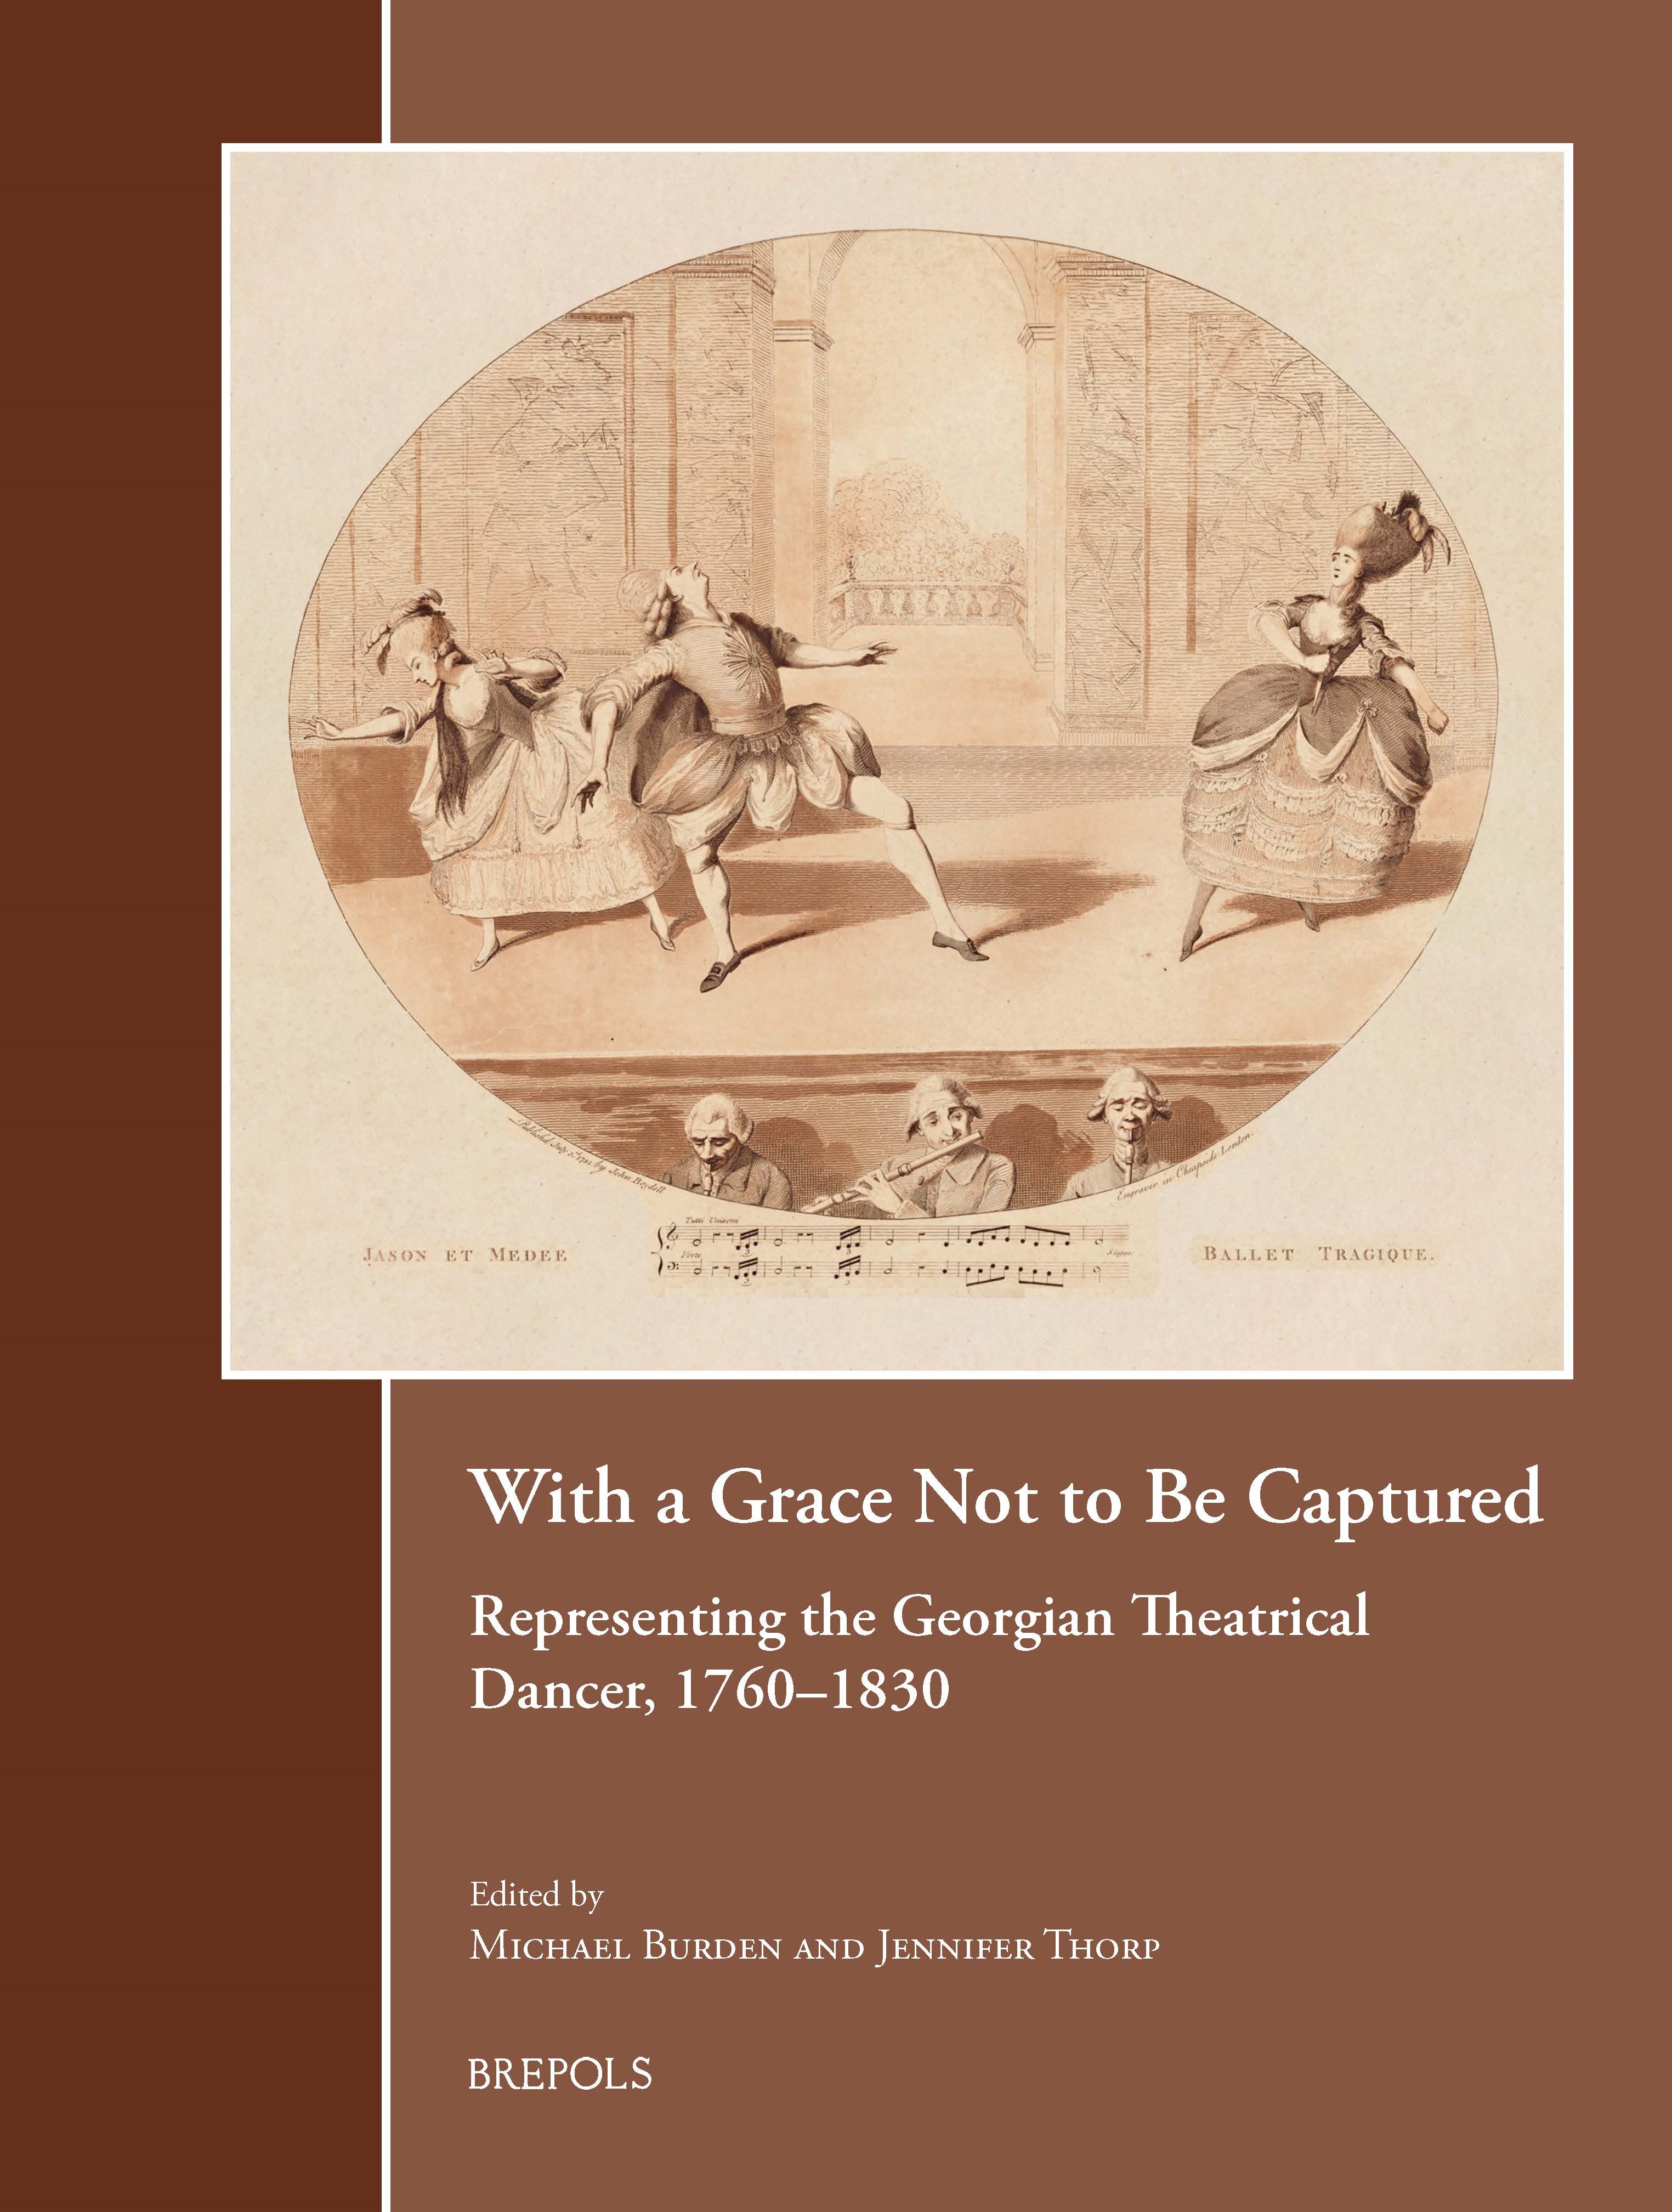 Front cover of the book, featuring image of an 18th century ballet